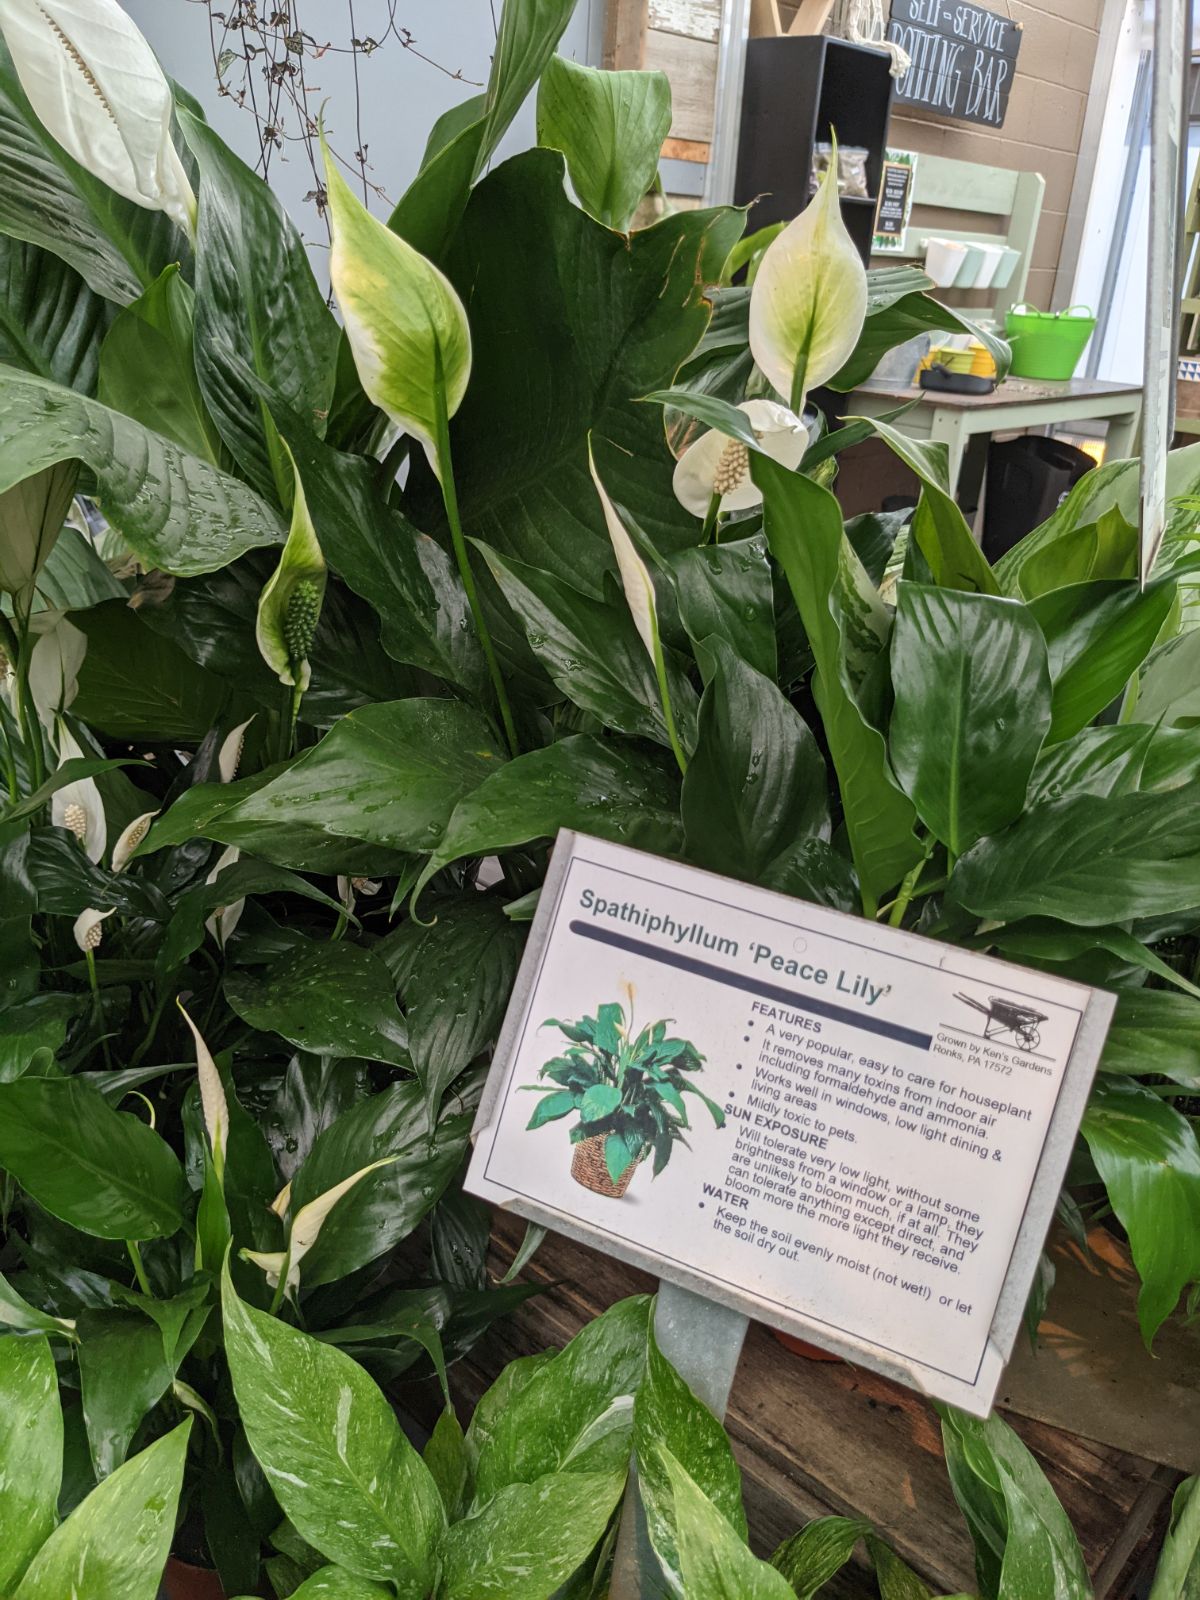 Peace lily plant with a sign